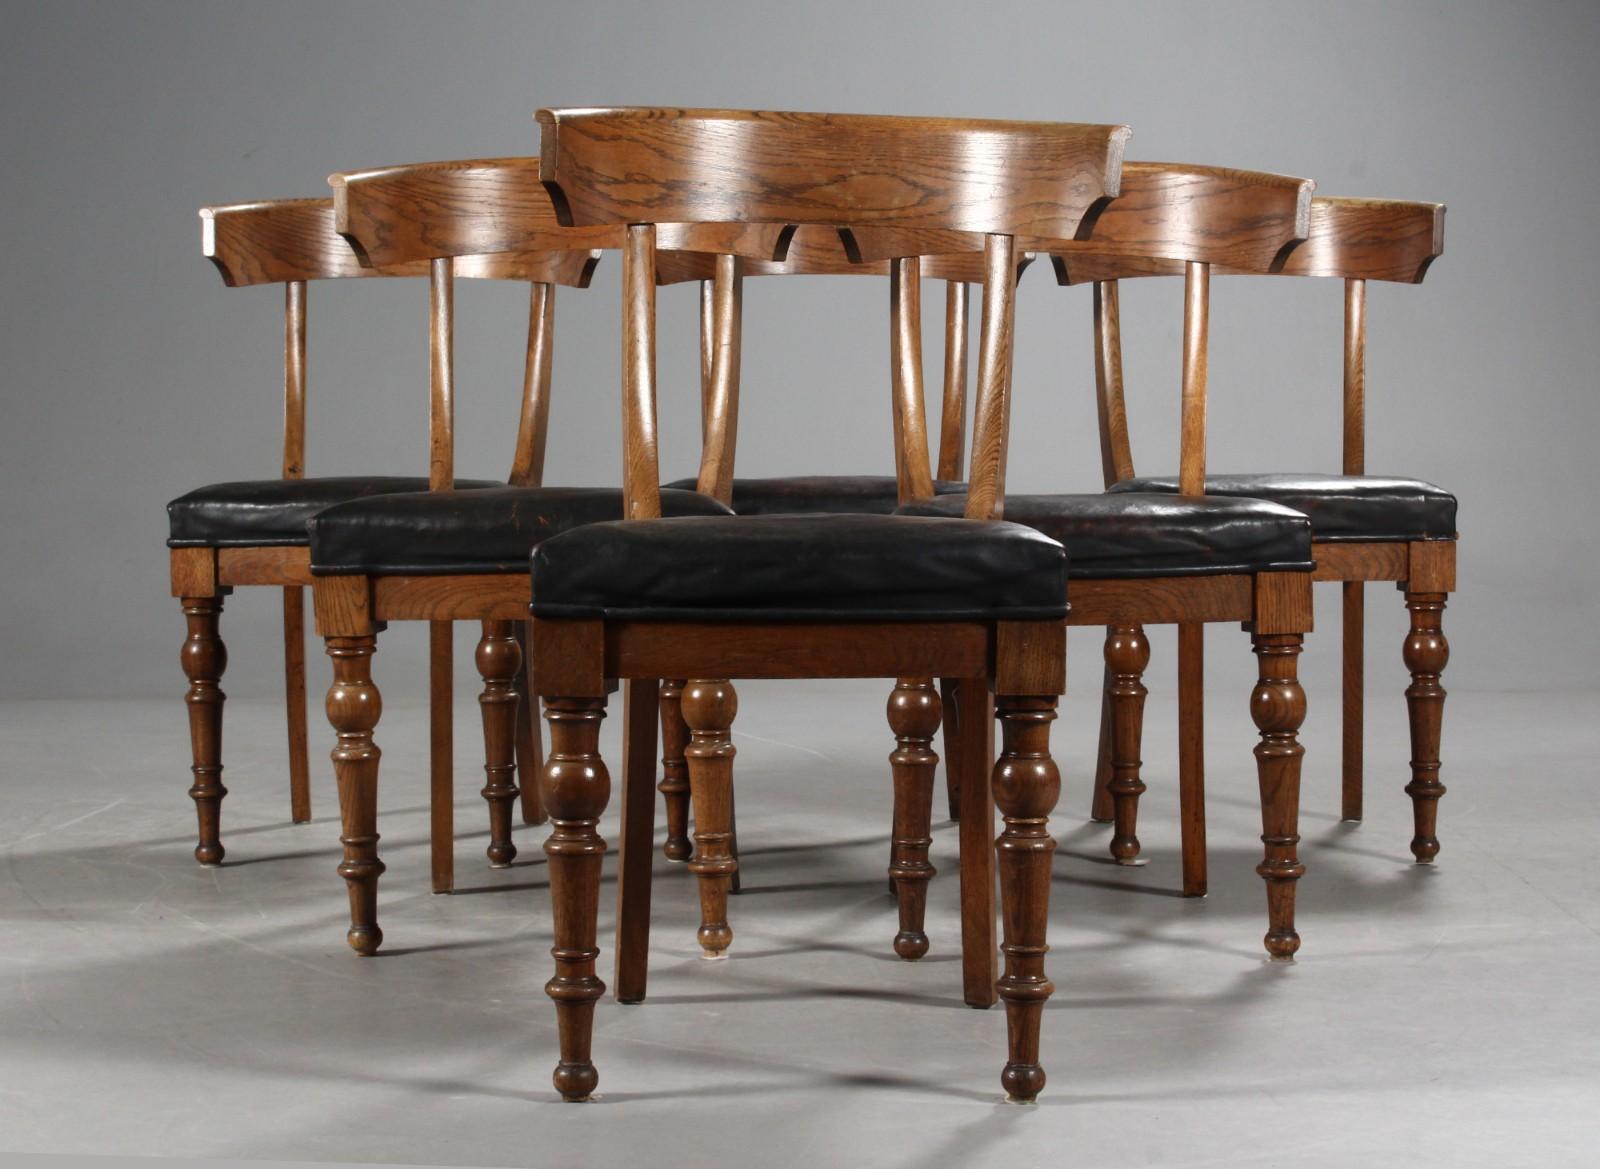 Set of 6 Klismos-style dining chairs in oak with seats covered in black fabric and turned front legs and sabre back legs, circa 1900.